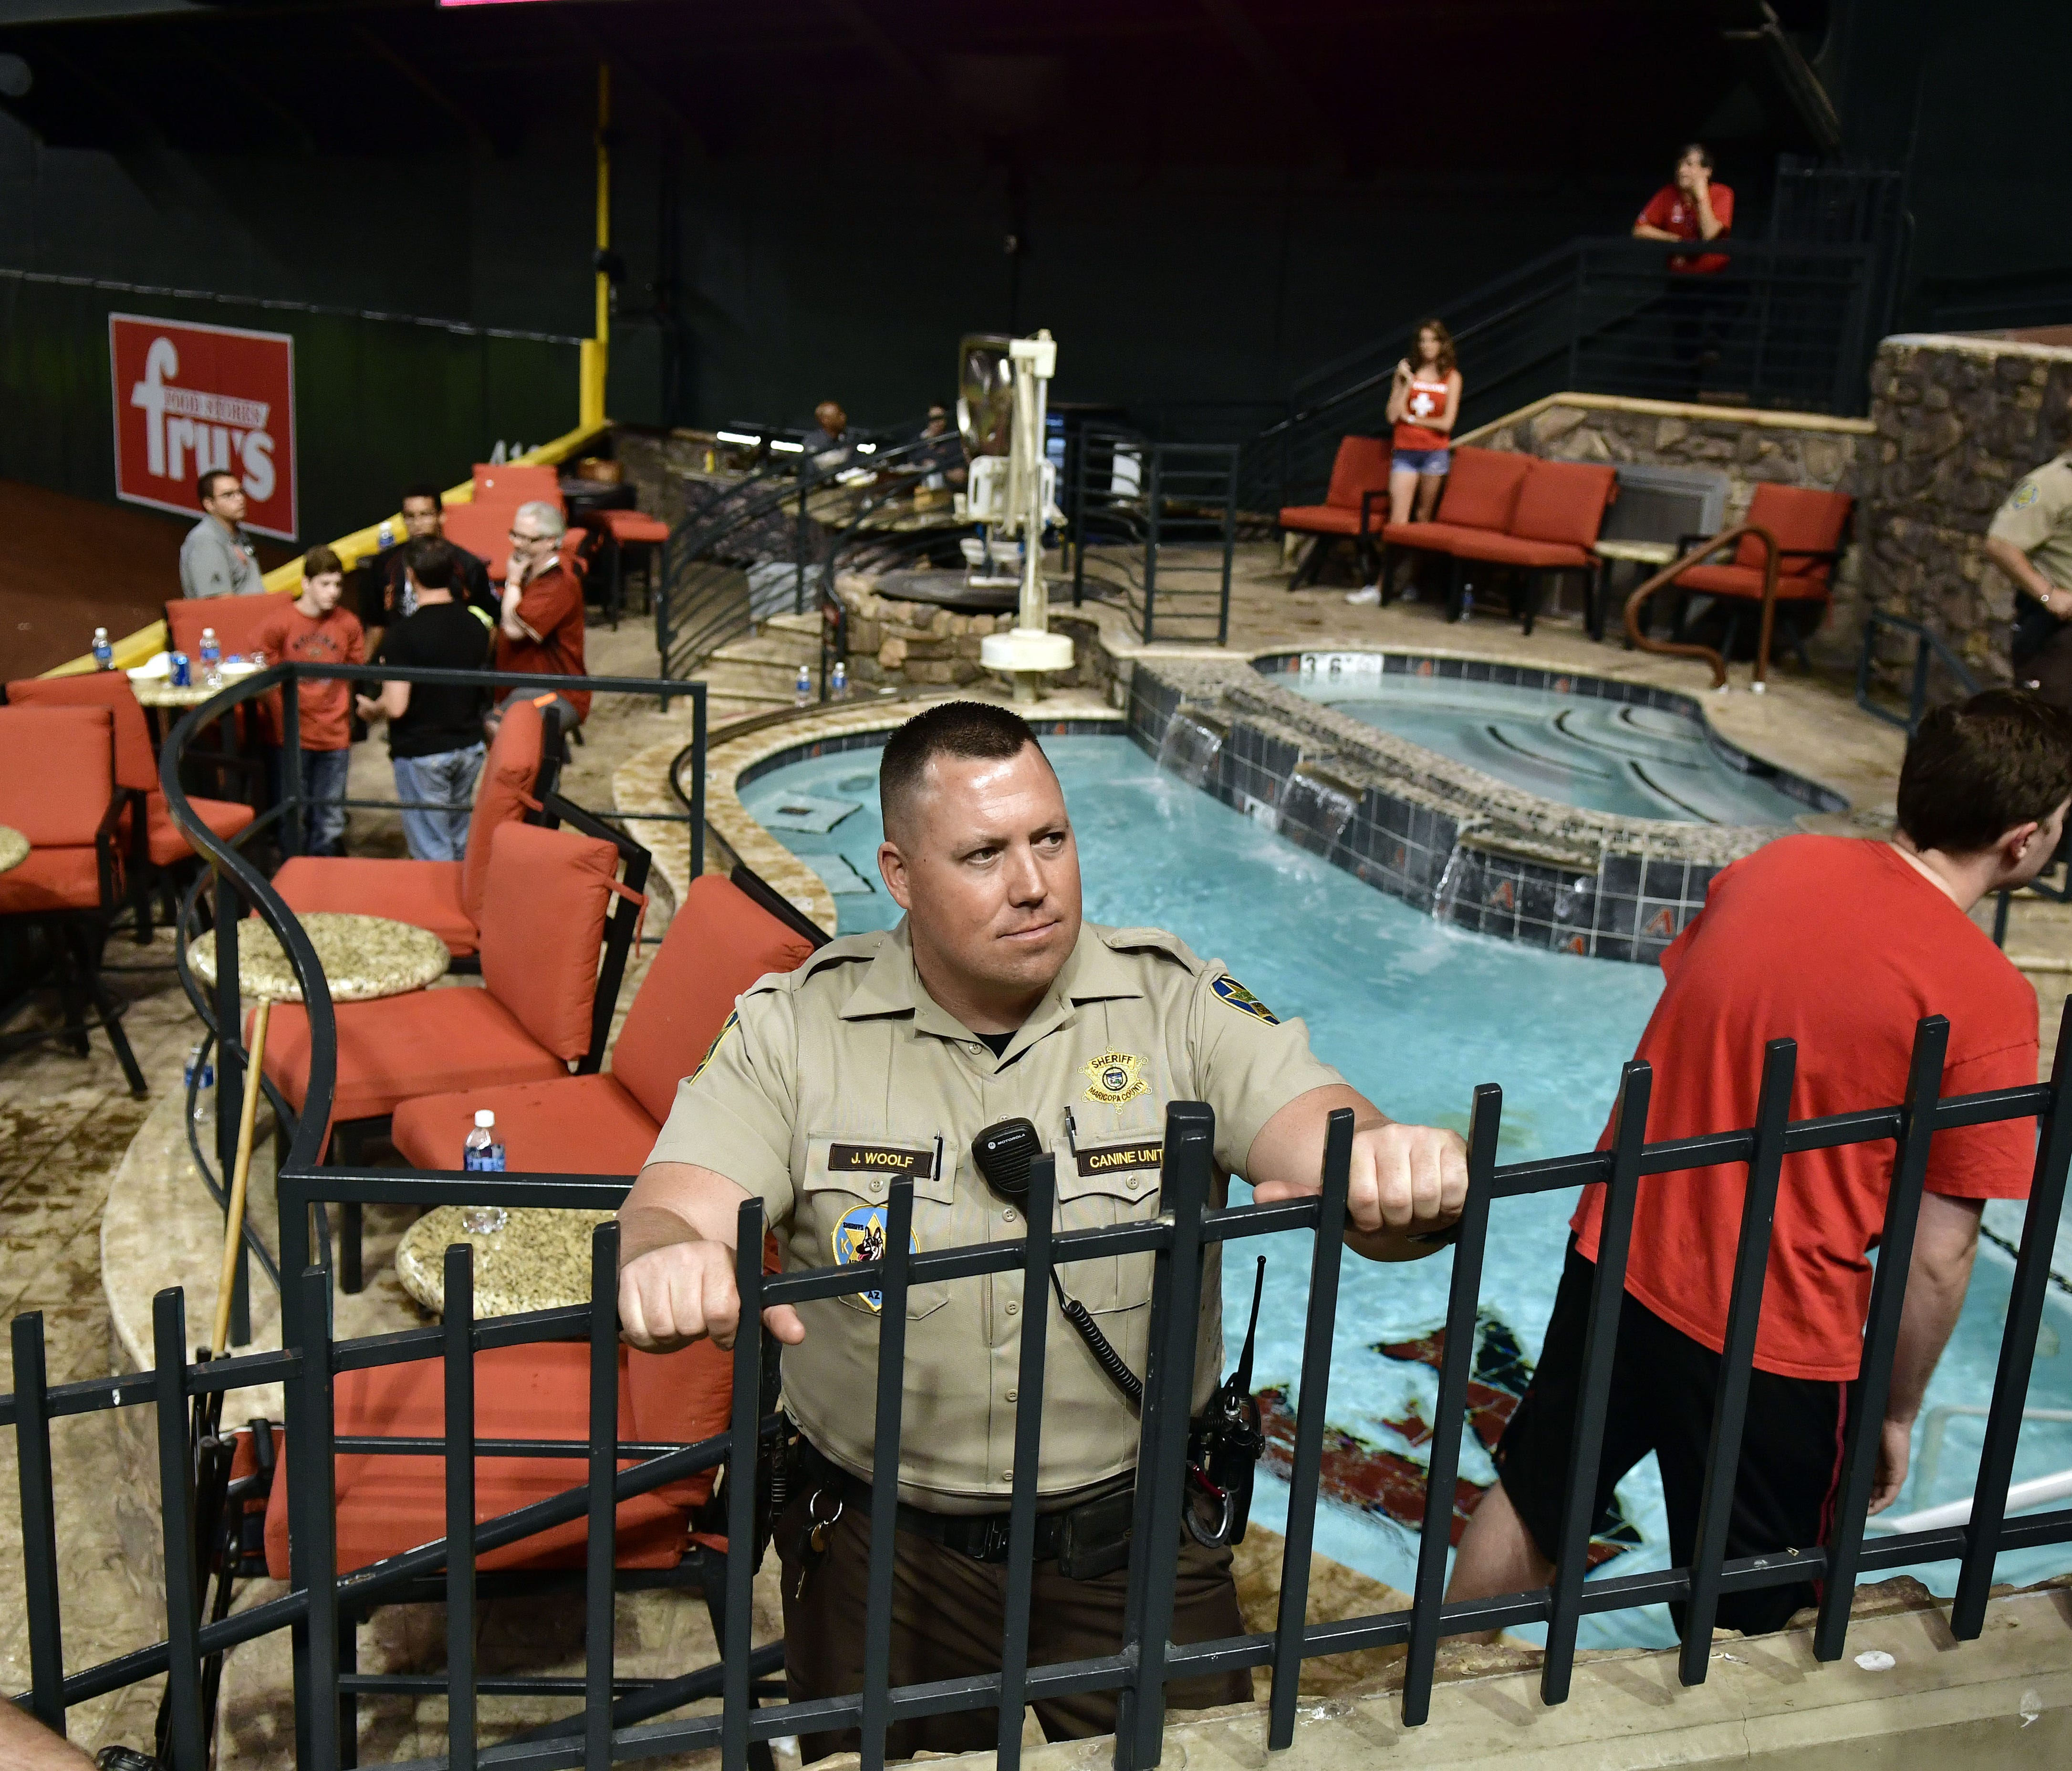 Police and venue security guard the pool area following the Dodgers victory.